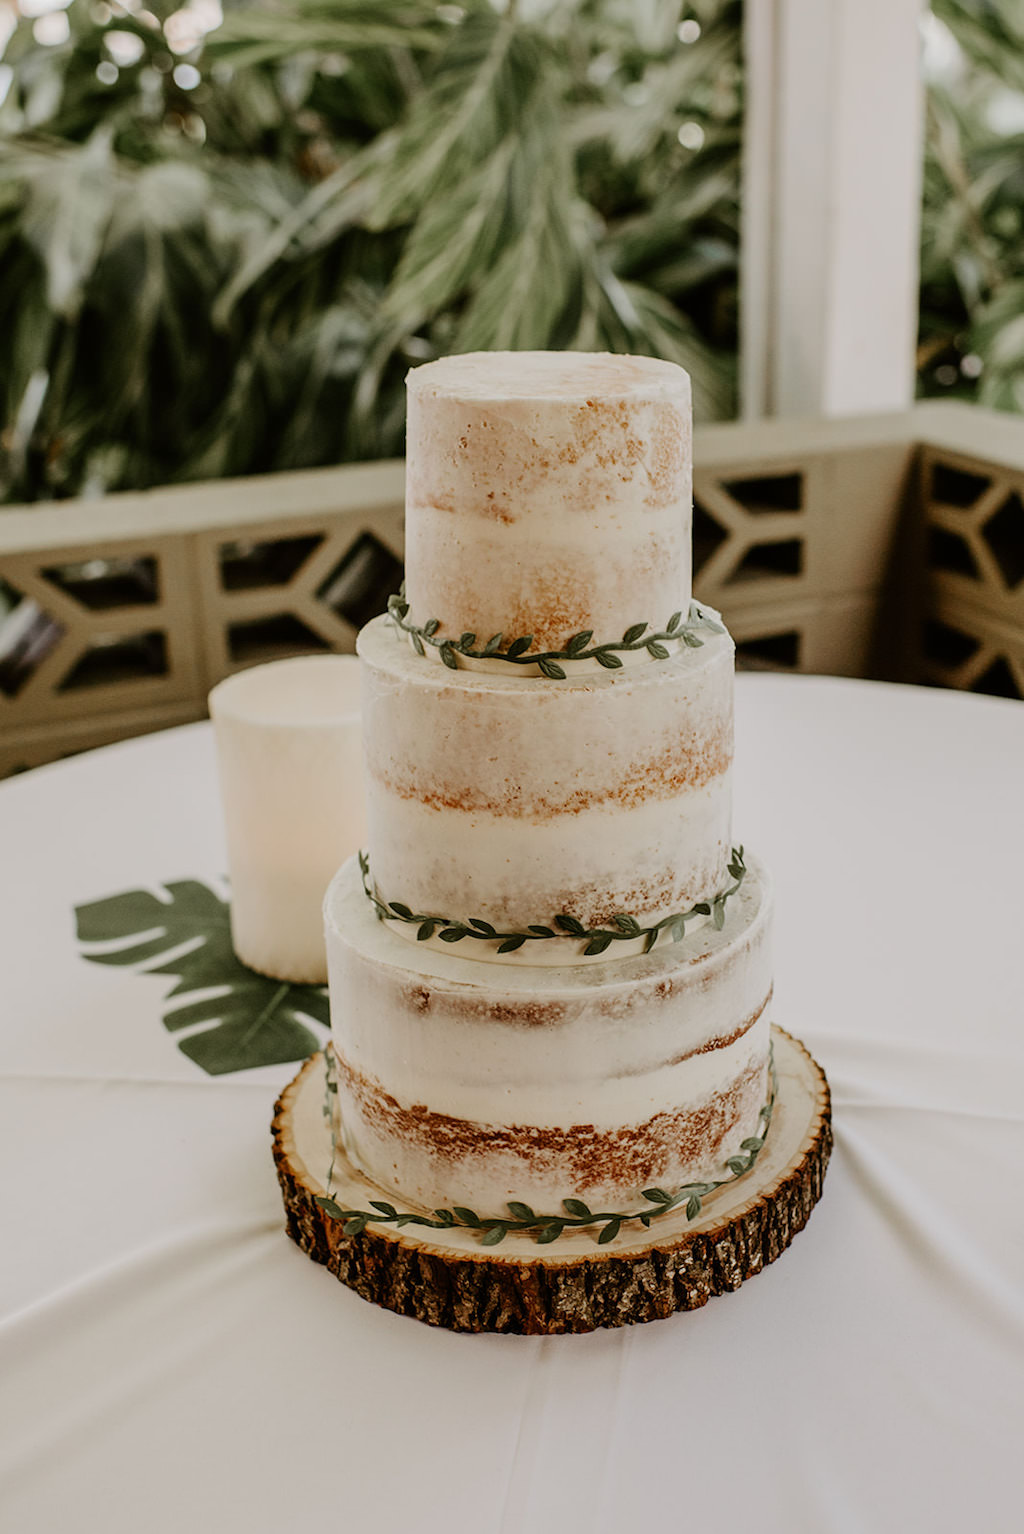 Three Tier Rustic White Semi Naked Wedding Cake Garnished with Greenery on Round Wood Platter